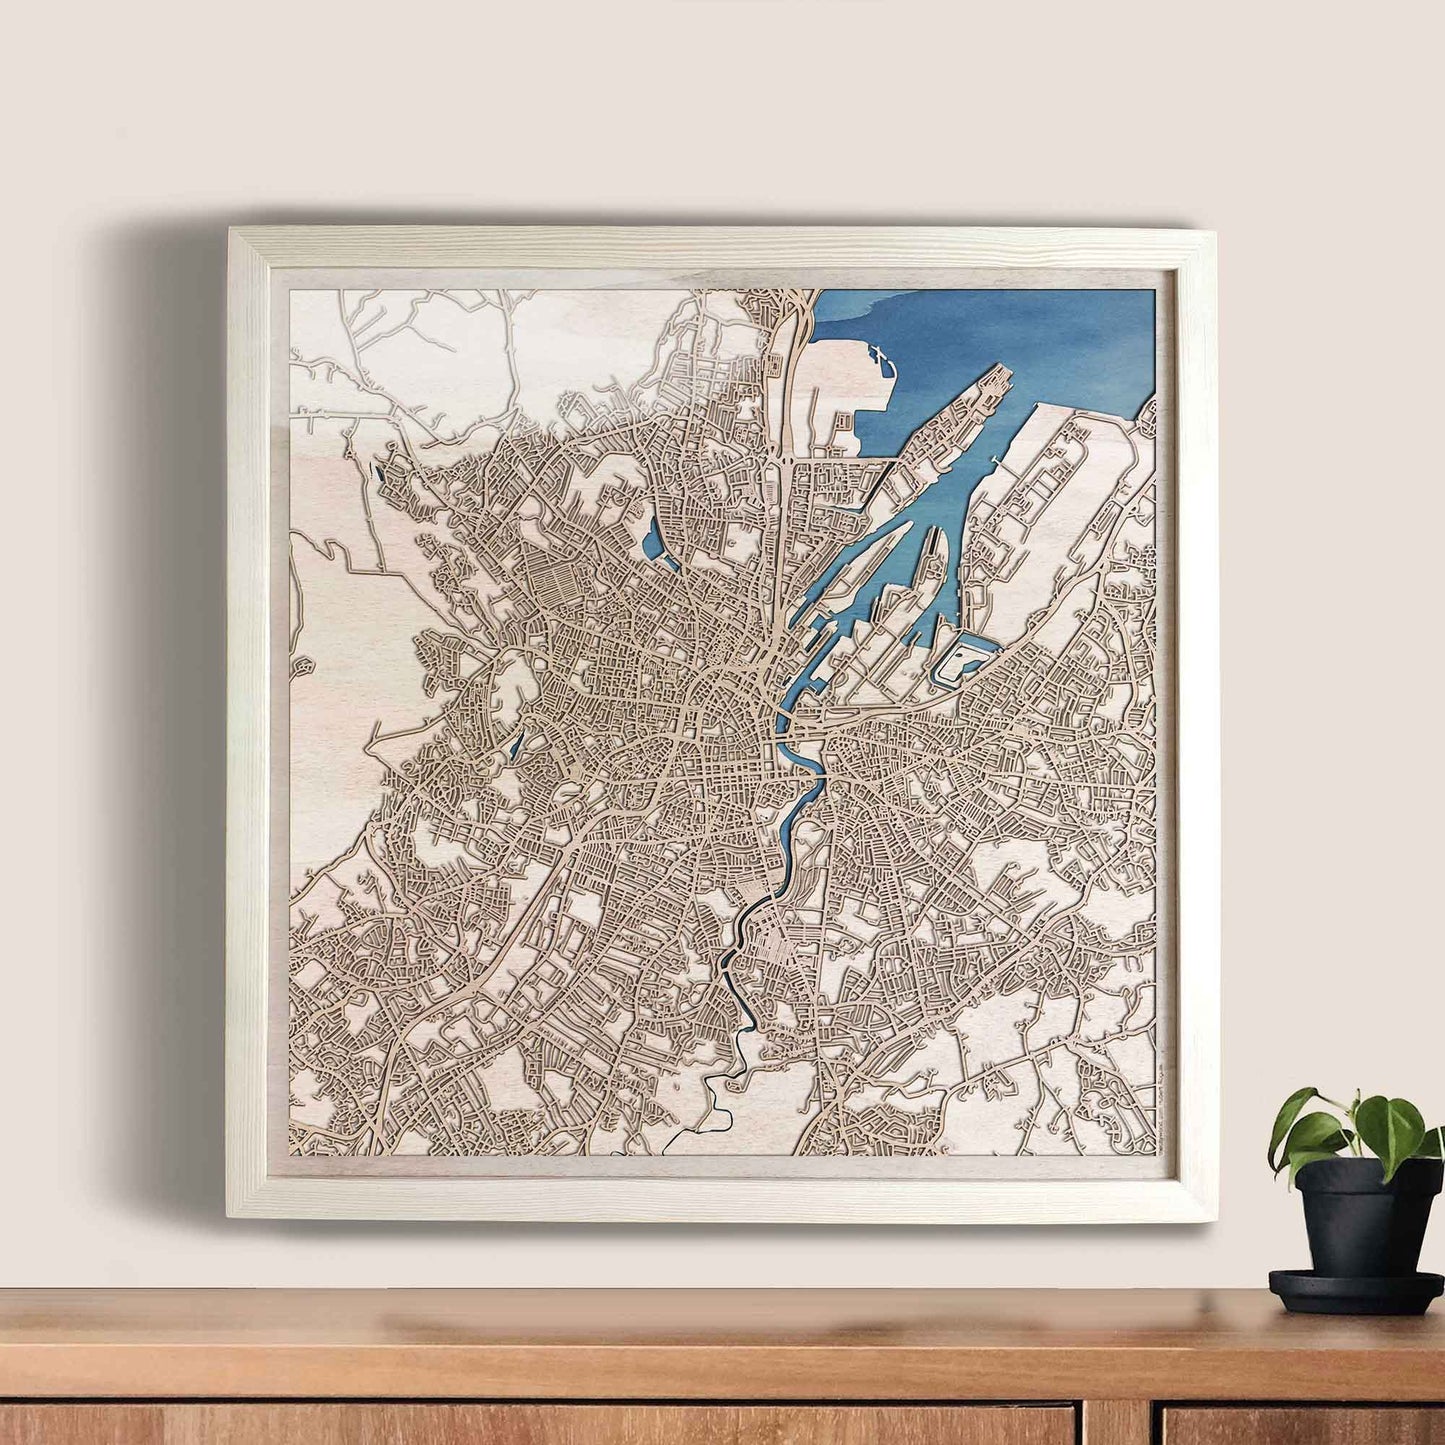 Belfast Wooden Map by CityWood - Custom Wood Map Art - Unique Laser Cut Engraved - Anniversary Gift